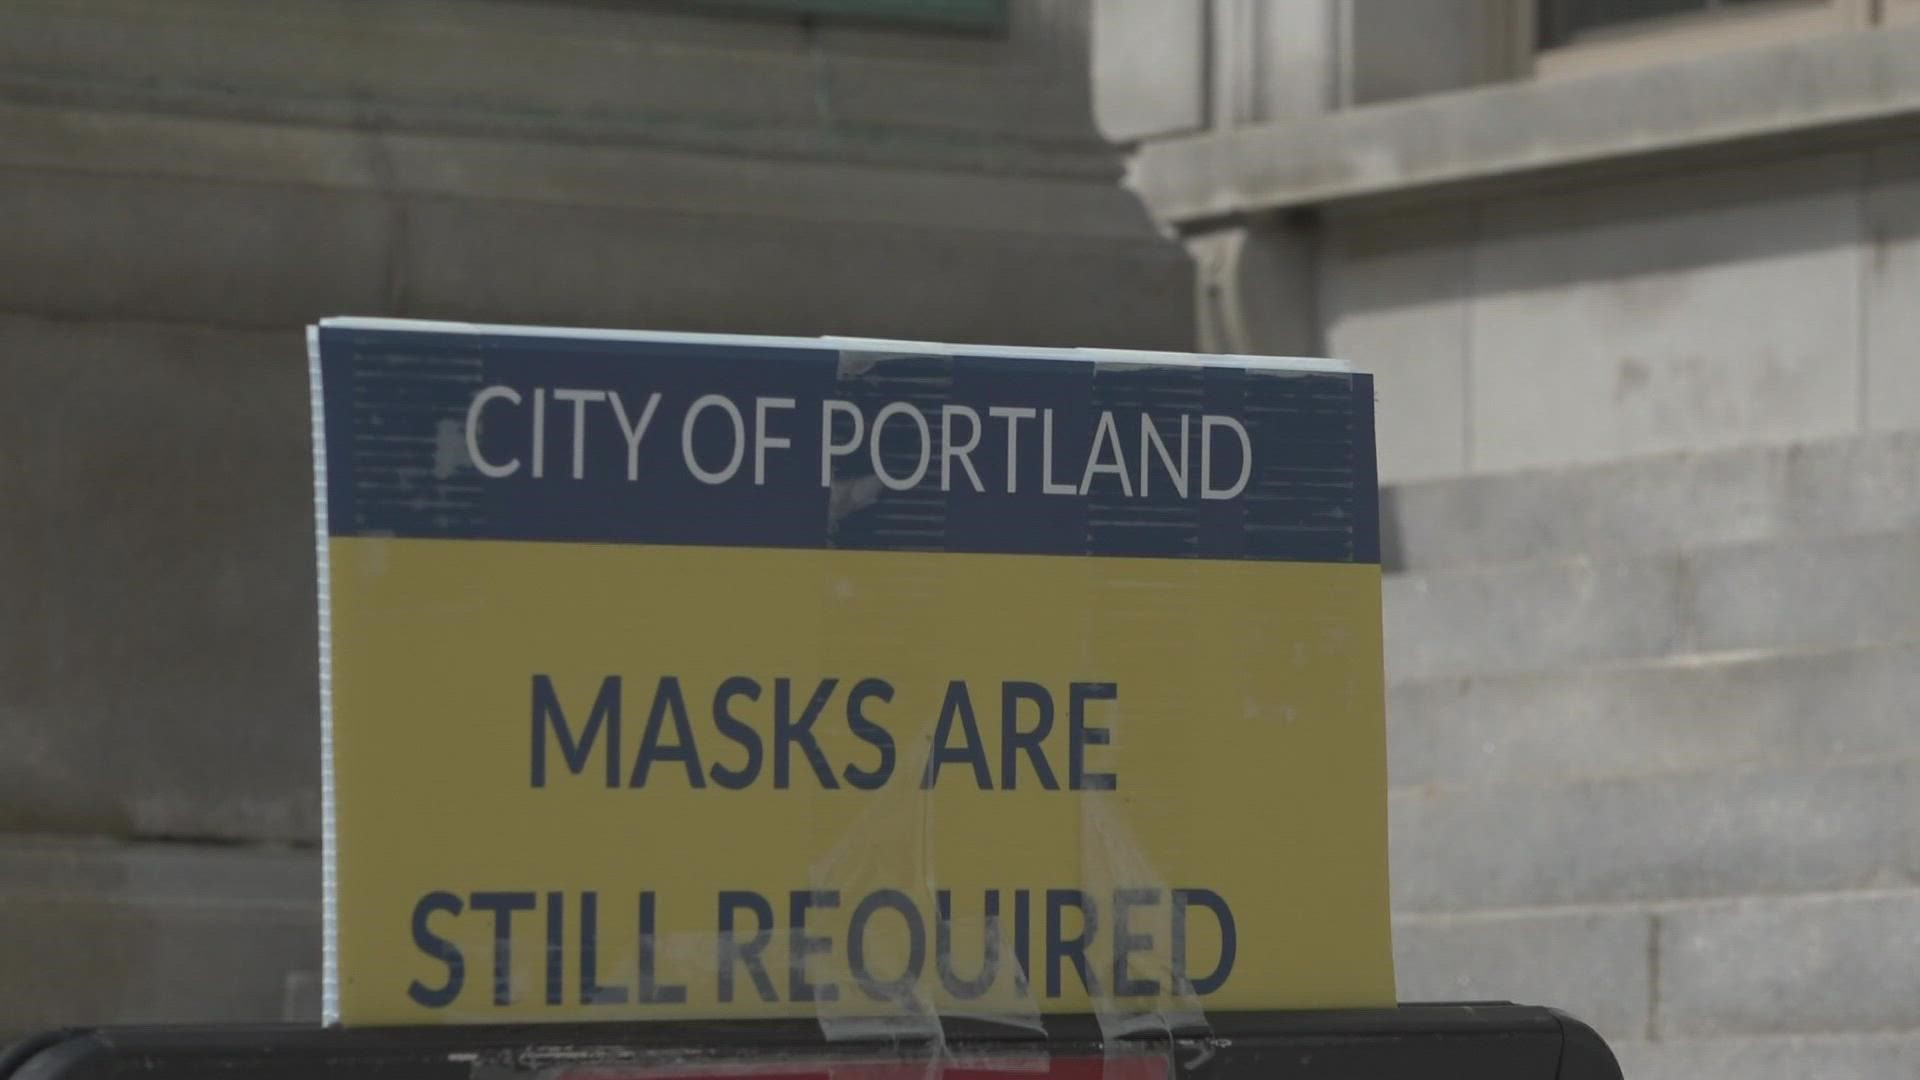 On Monday, September 13, Portland city councilors are expected to vote on a proposal to reinstate a citywide indoor mask mandate, regardless of vaccination status.